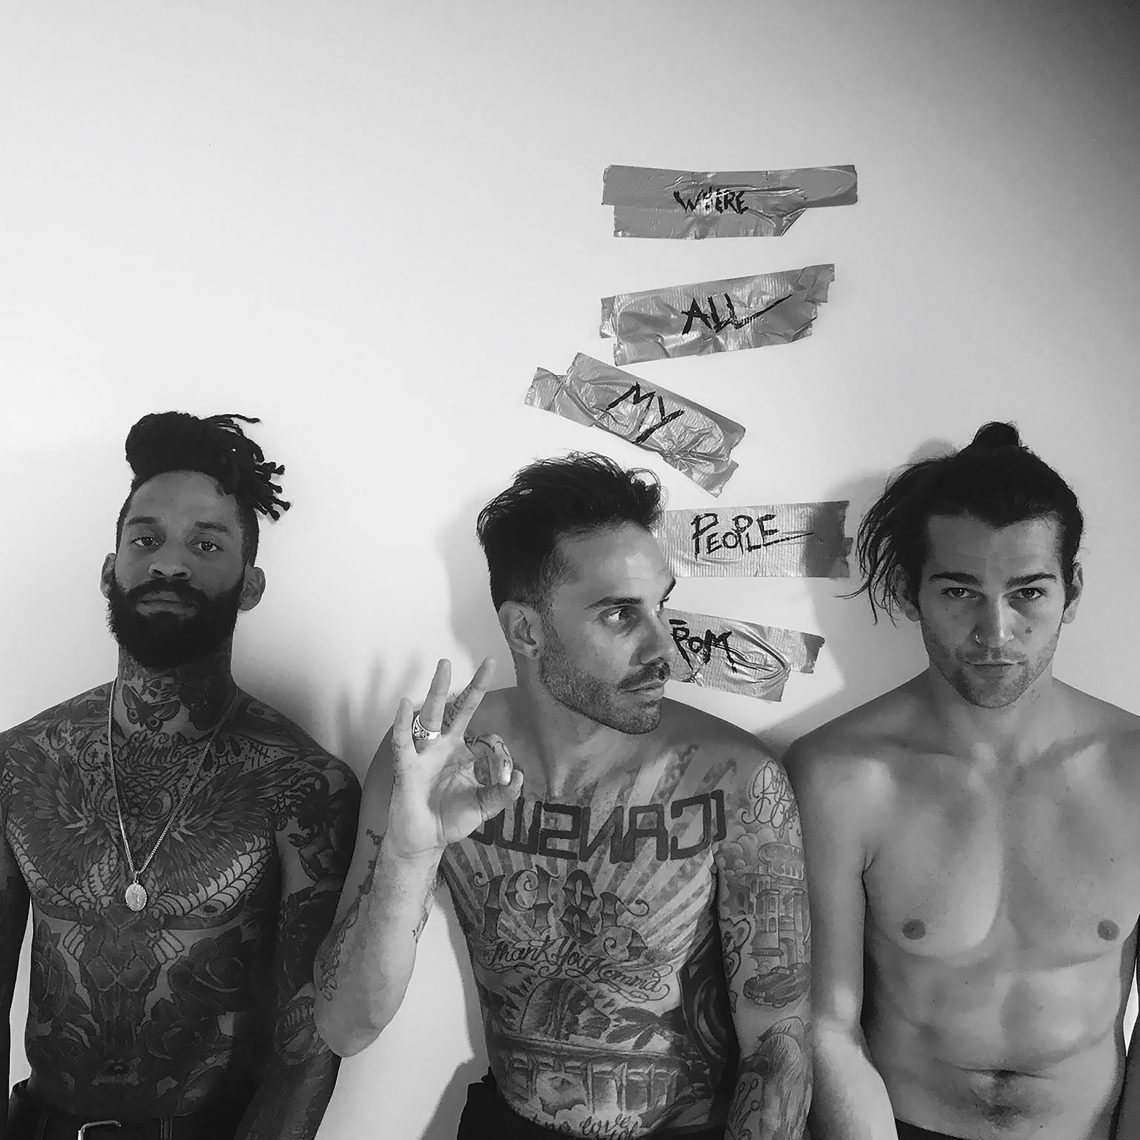 THE FEVER 333 sign to Roadrunner Records, release ‘Made An America’ EP